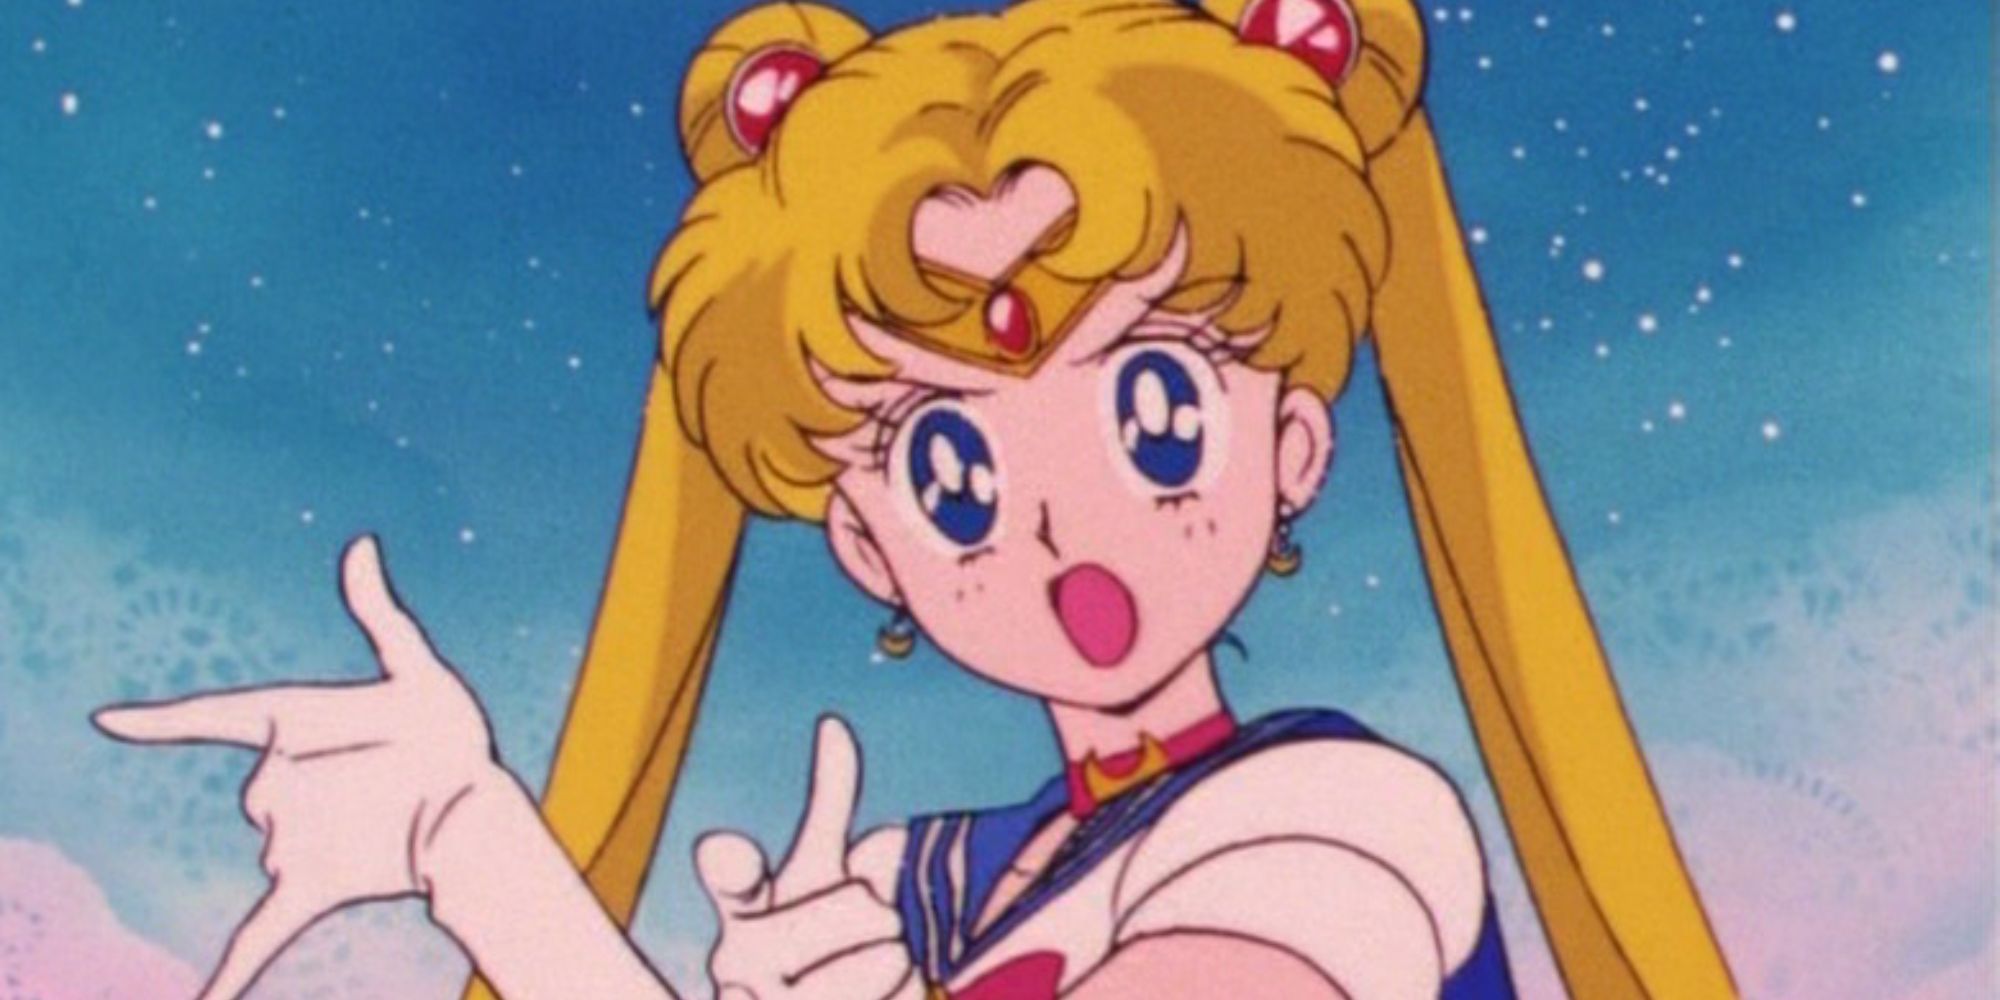 A Sailor Moon Guardian holding her hands up with a shocked face